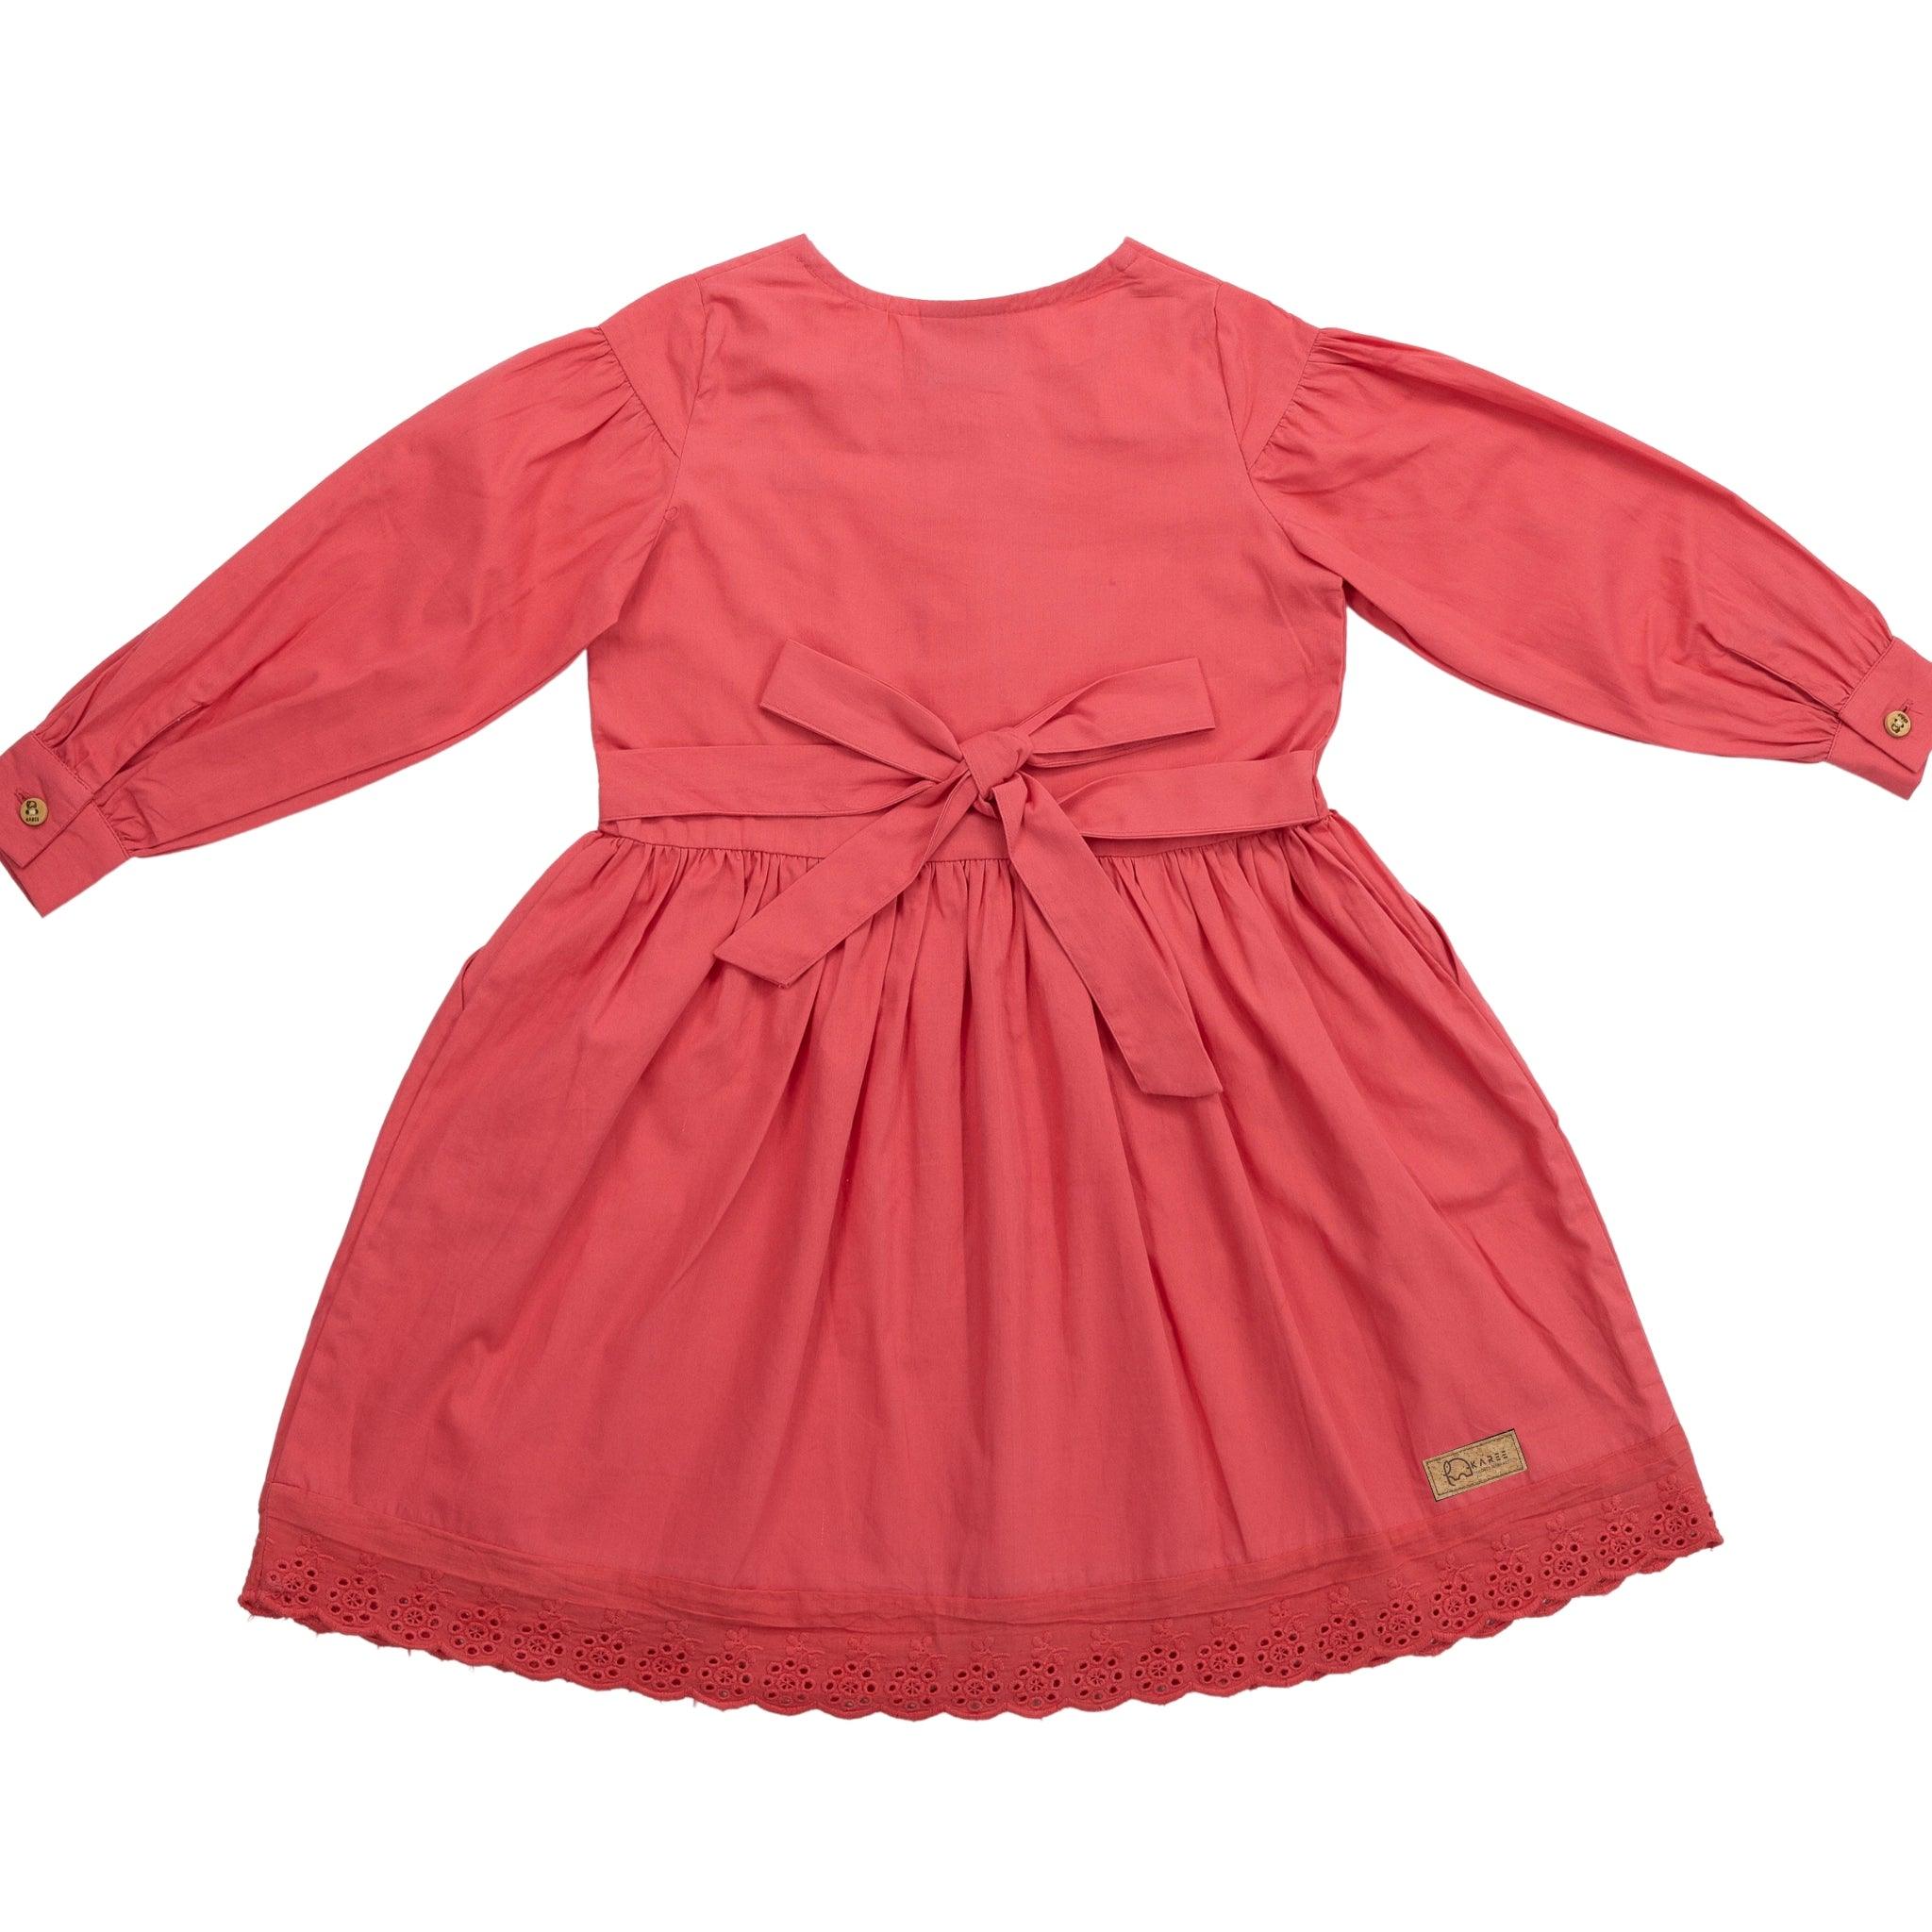 A coral pink toddler's dress with long puff sleeves, a bow at the waist, and lace trim along the hem, displayed flat on a white background.